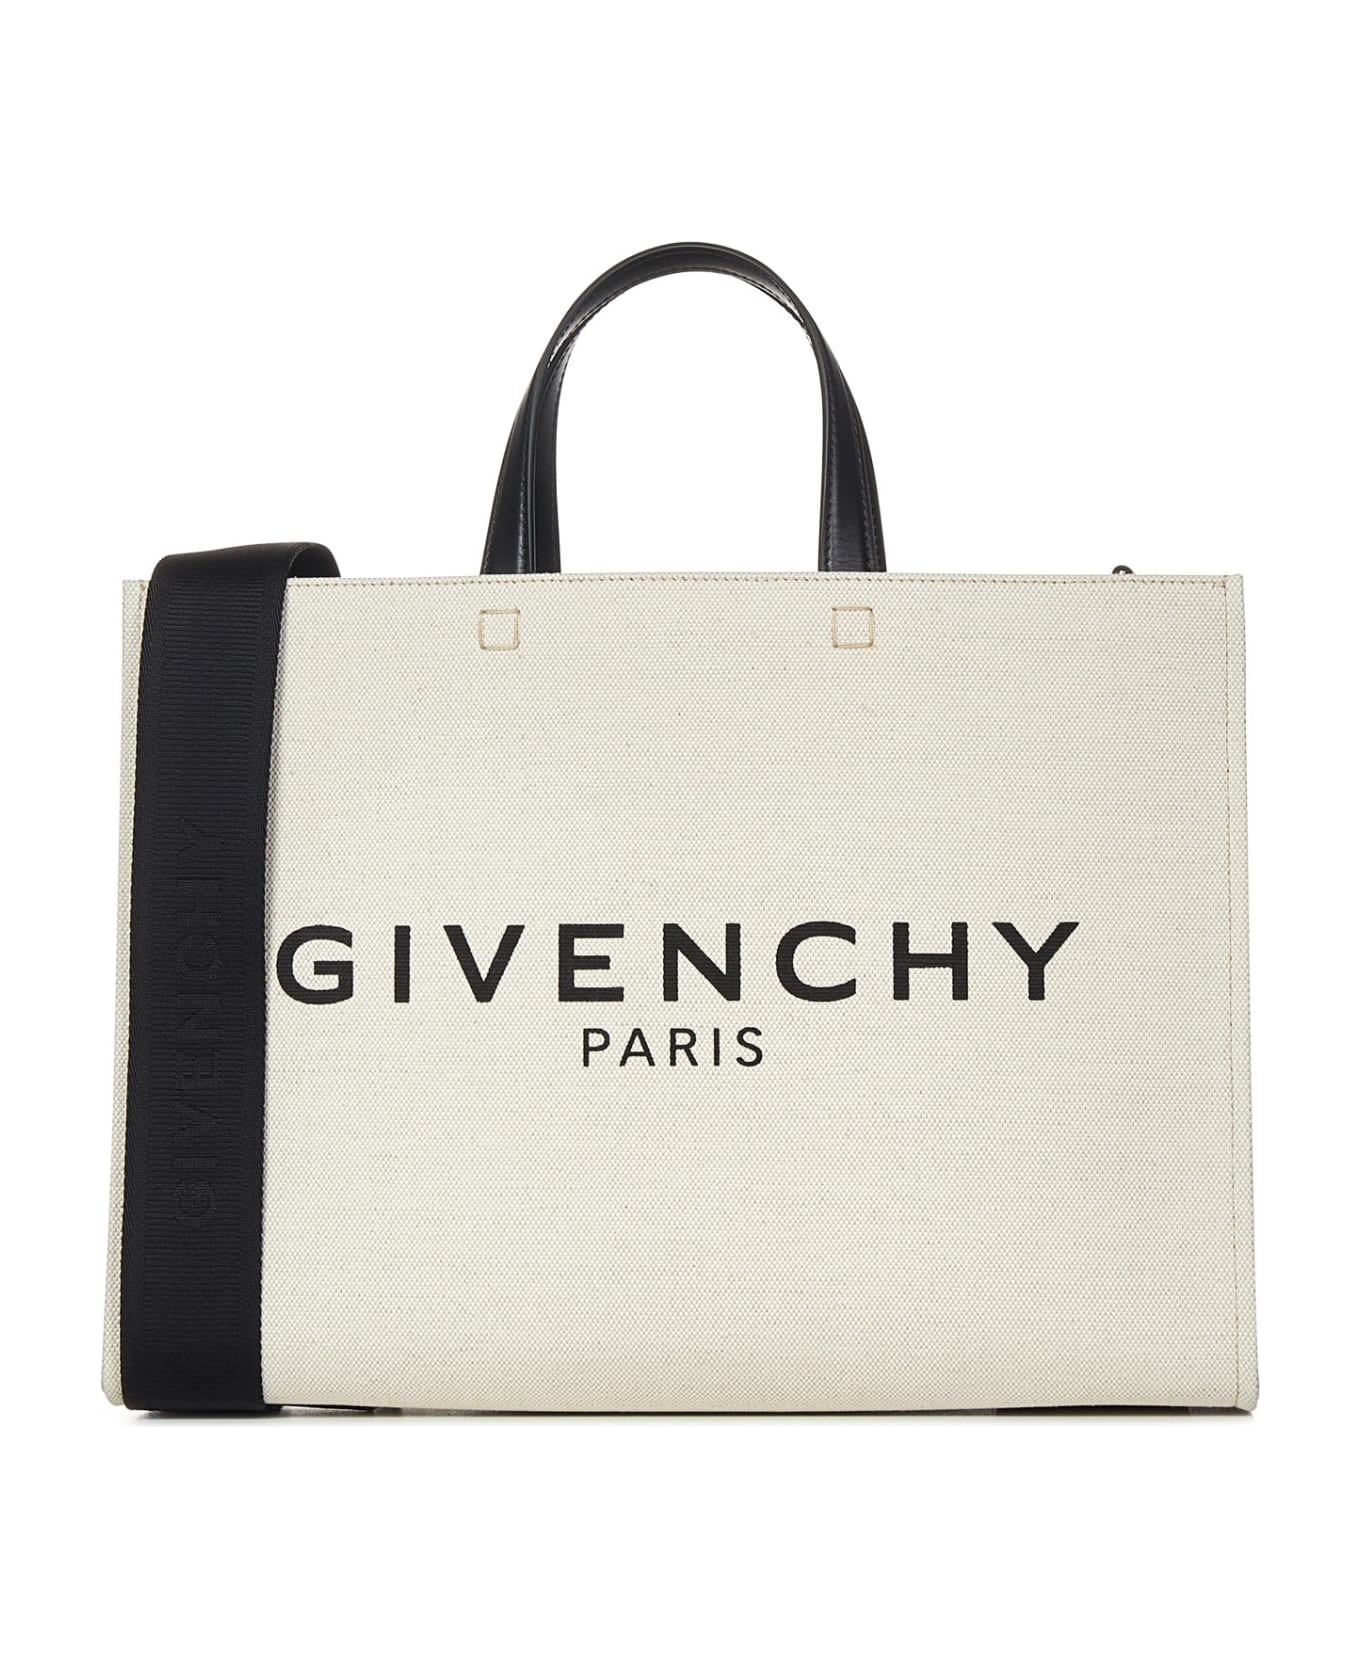 Givenchy G Medium Tote - Beige